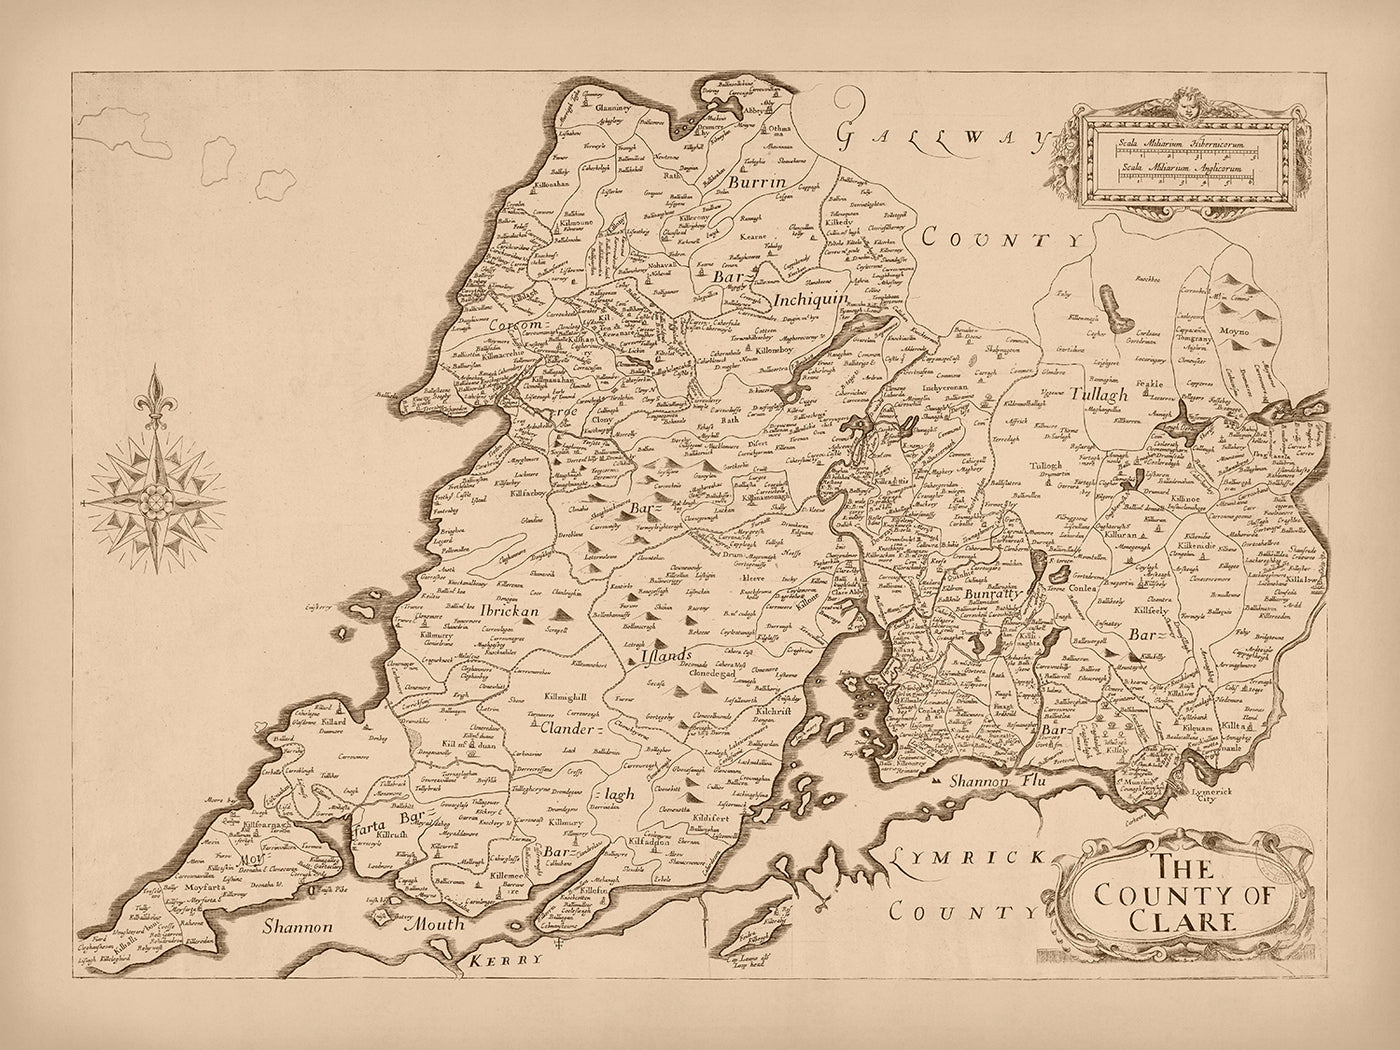 Old Map of County Clare by Petty, 1685: Bunratty Castle, Cliffs of Moher, The Burren, Loop Head, Kilrush